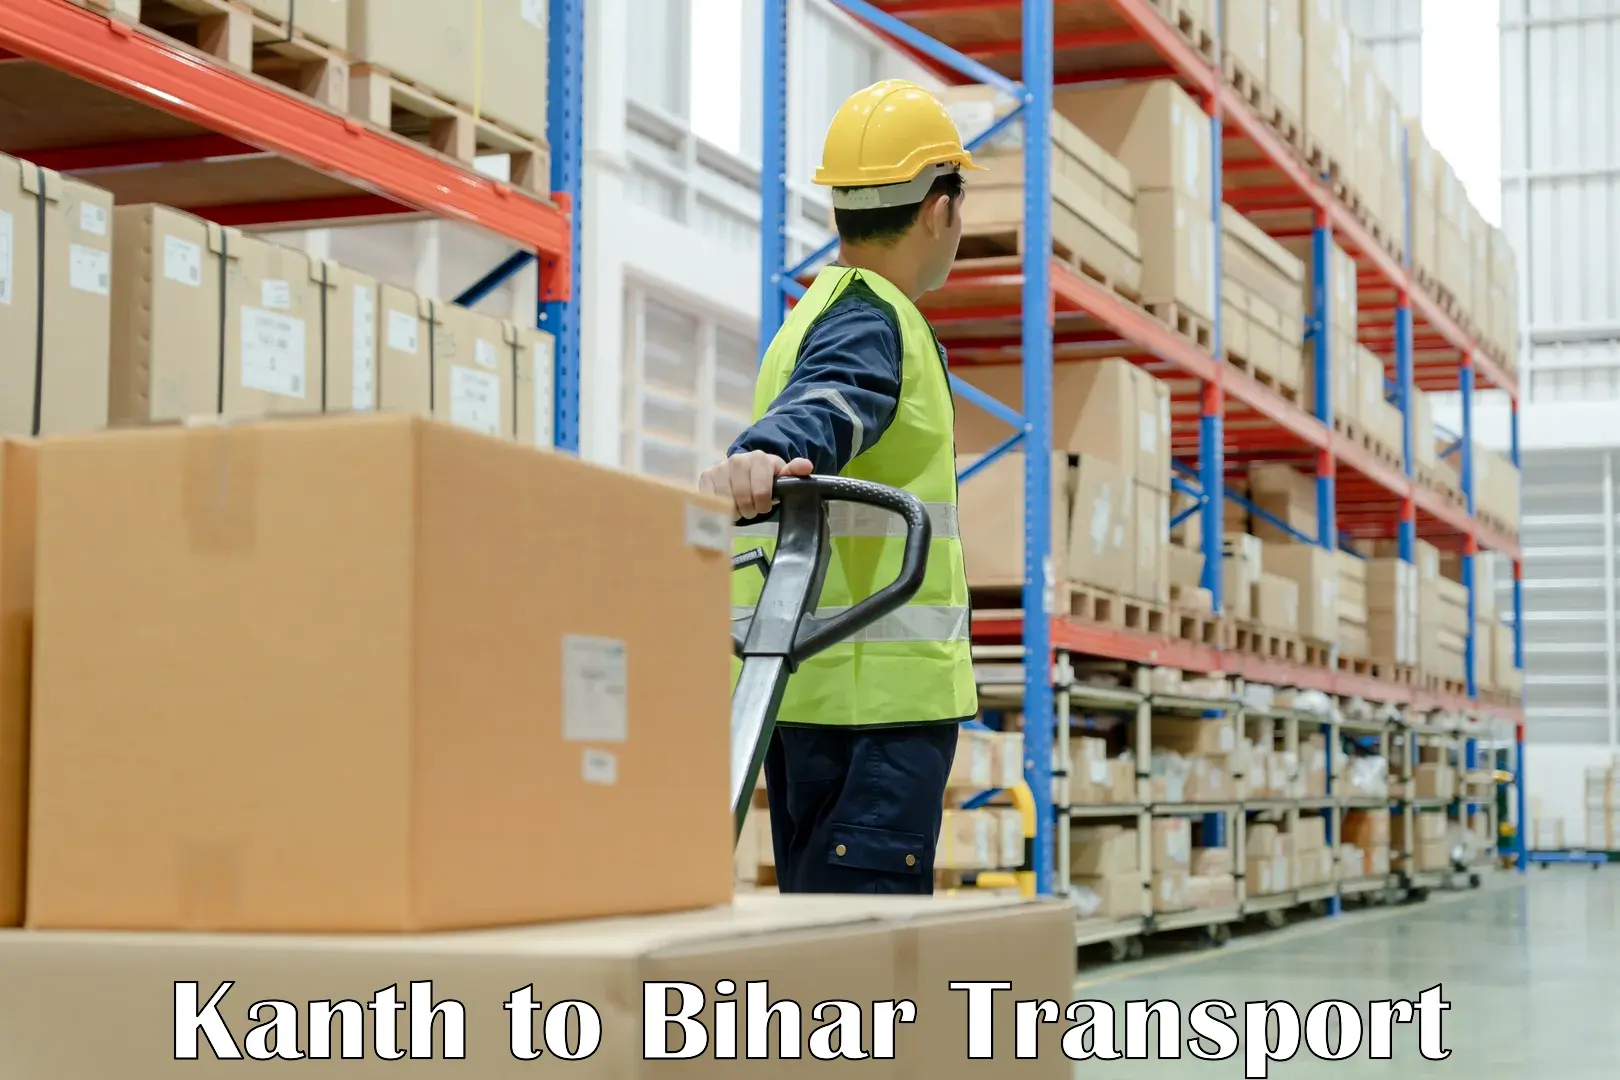 Part load transport service in India Kanth to Bihar